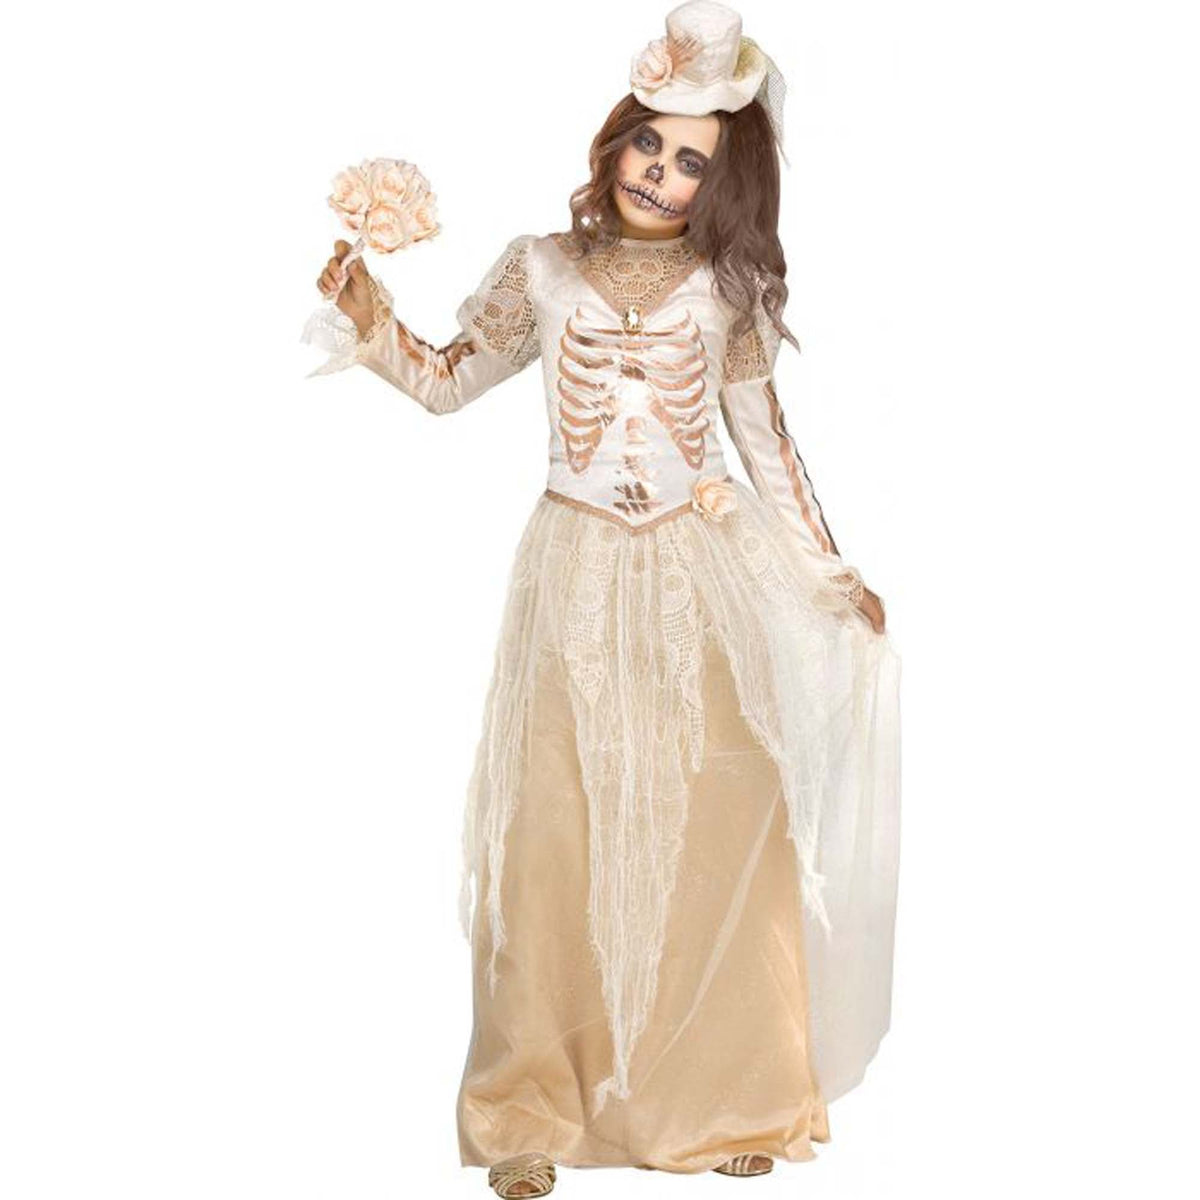 FUN WORLD Costumes Victorian Skeleton Bride Costume for Kids, White Gown